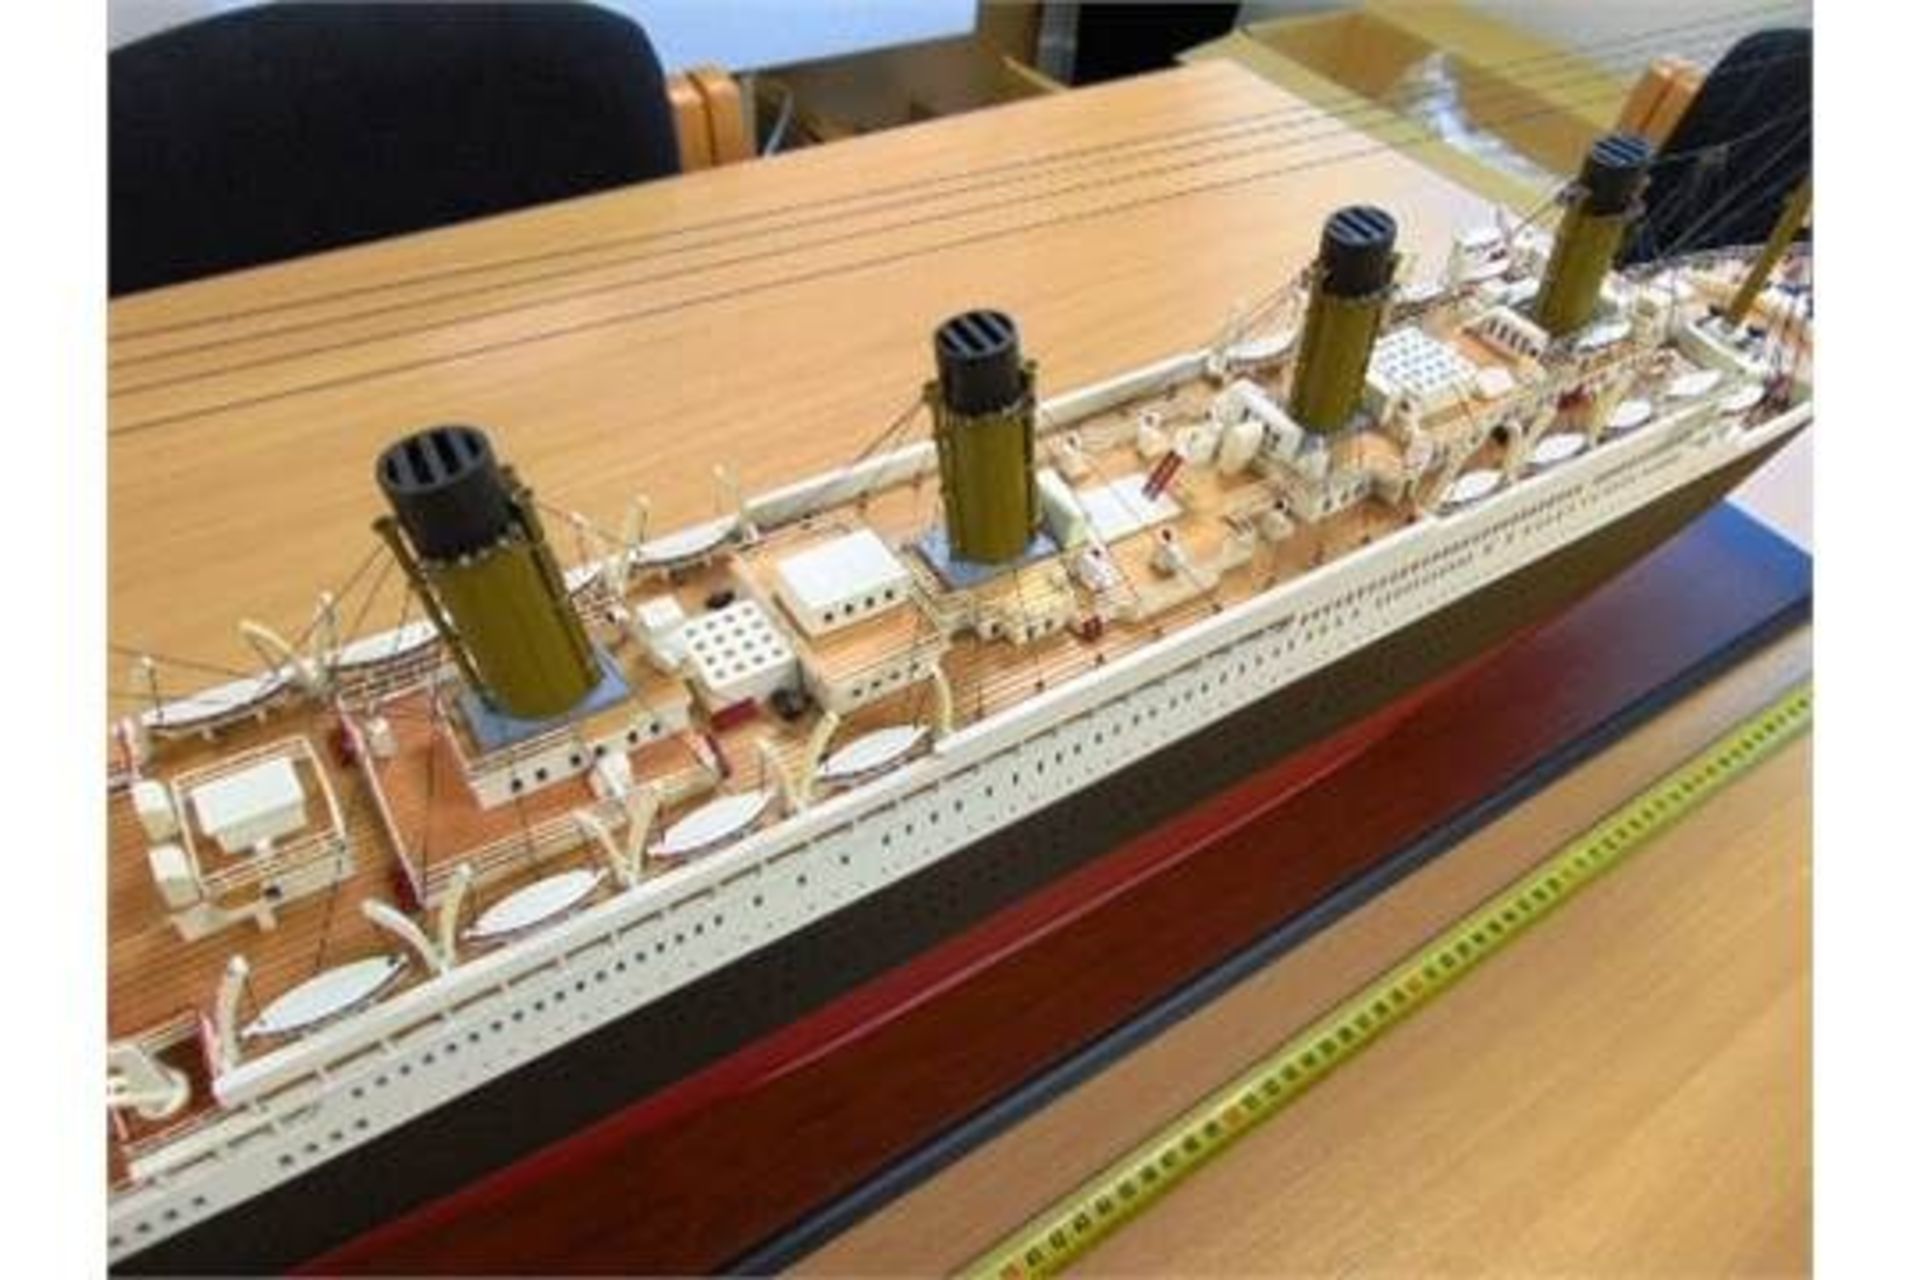 RMS TITANIC HIGHLY DETAILED WOOD SCALE MODEL - Image 6 of 11